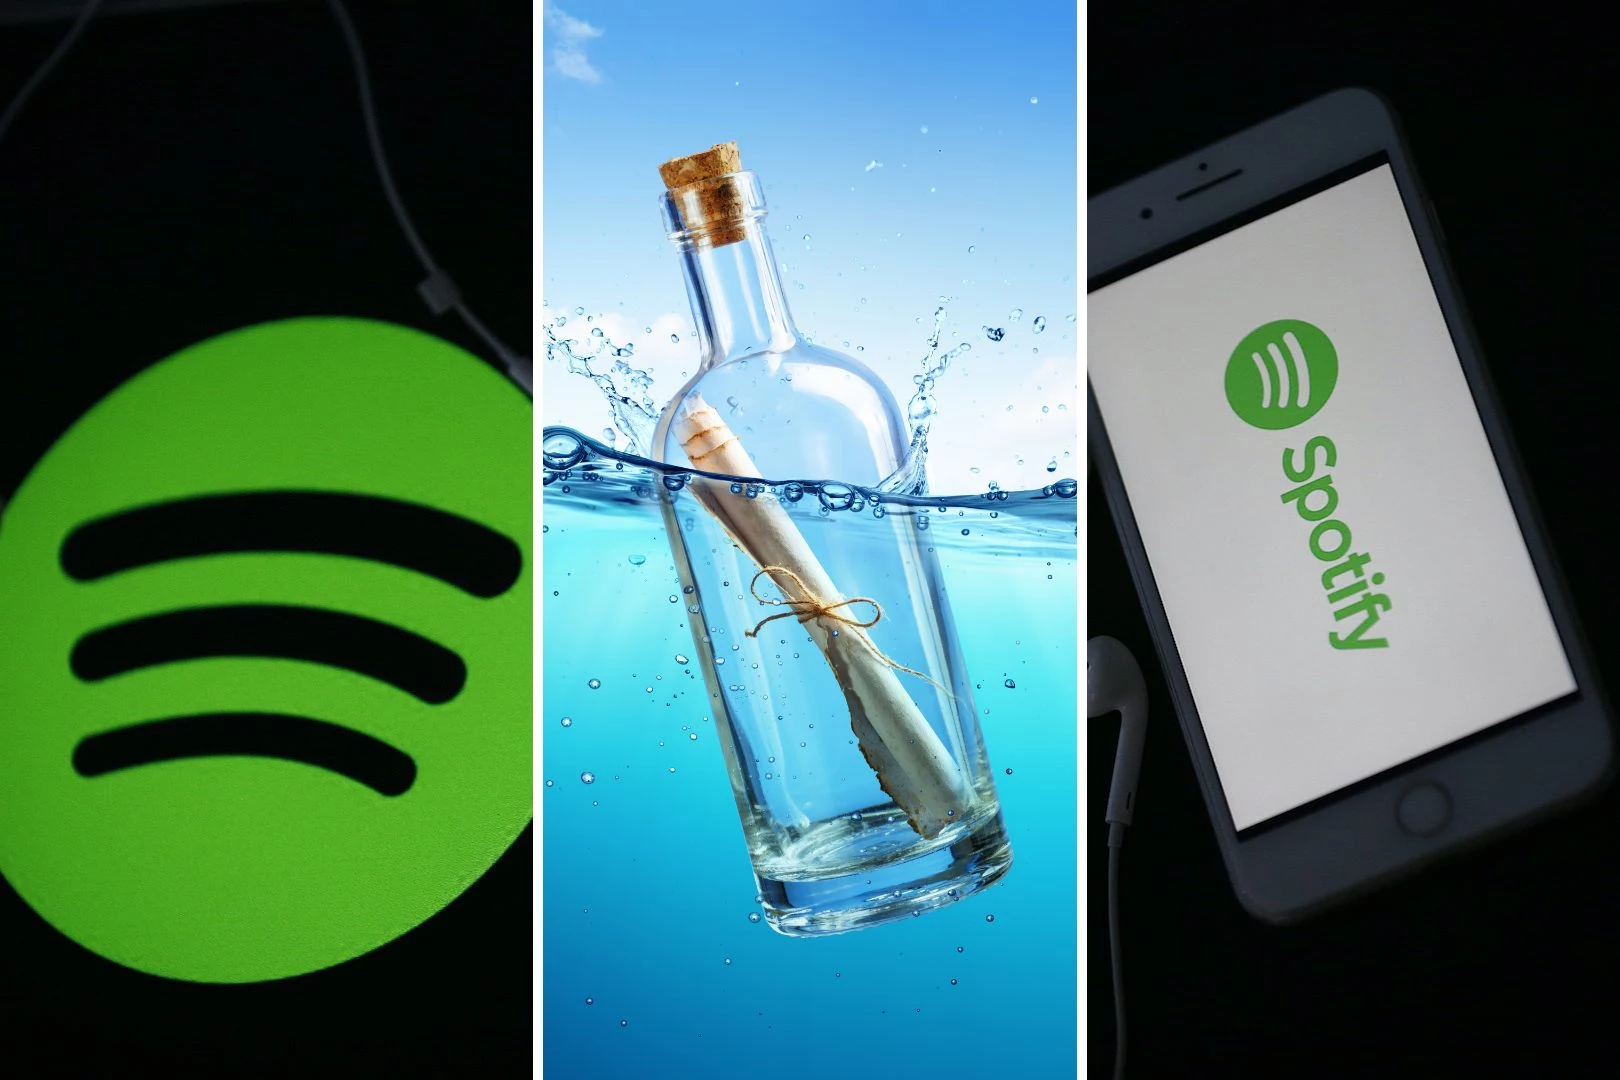 Your Spotify Gift Card Probably Won't Work and We Can Help